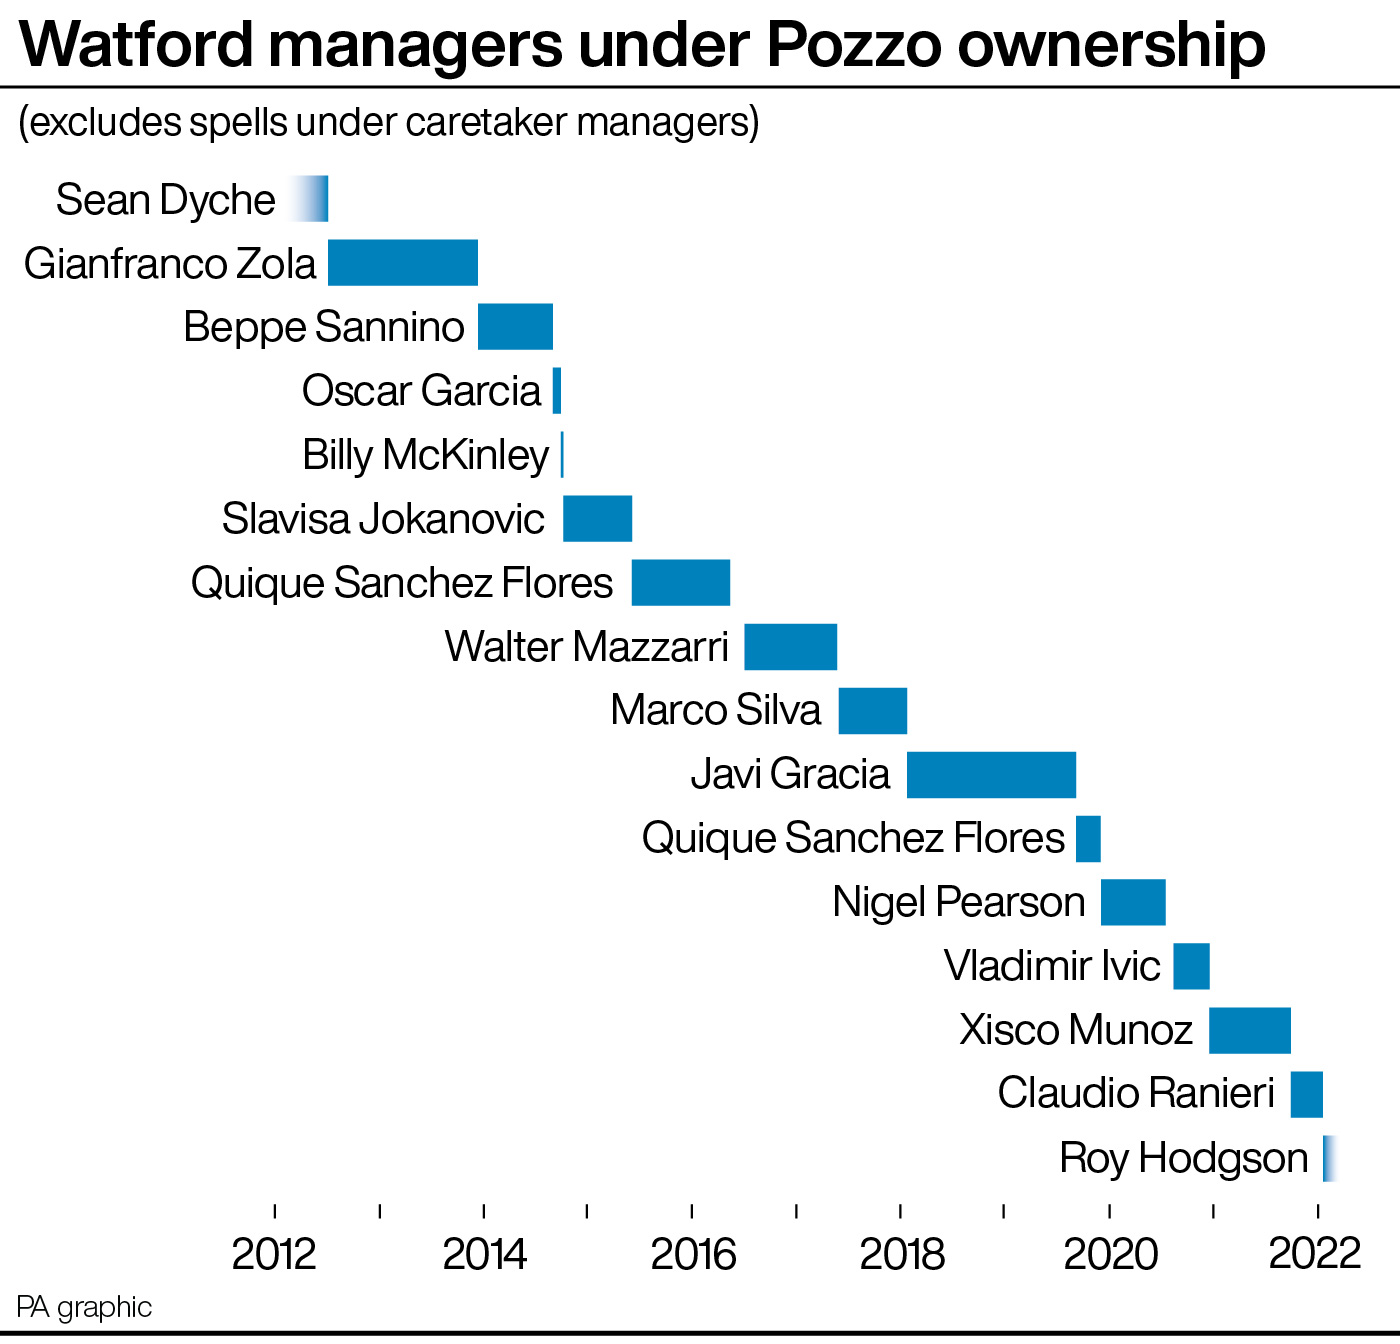 Watford managers under Pozzo ownership